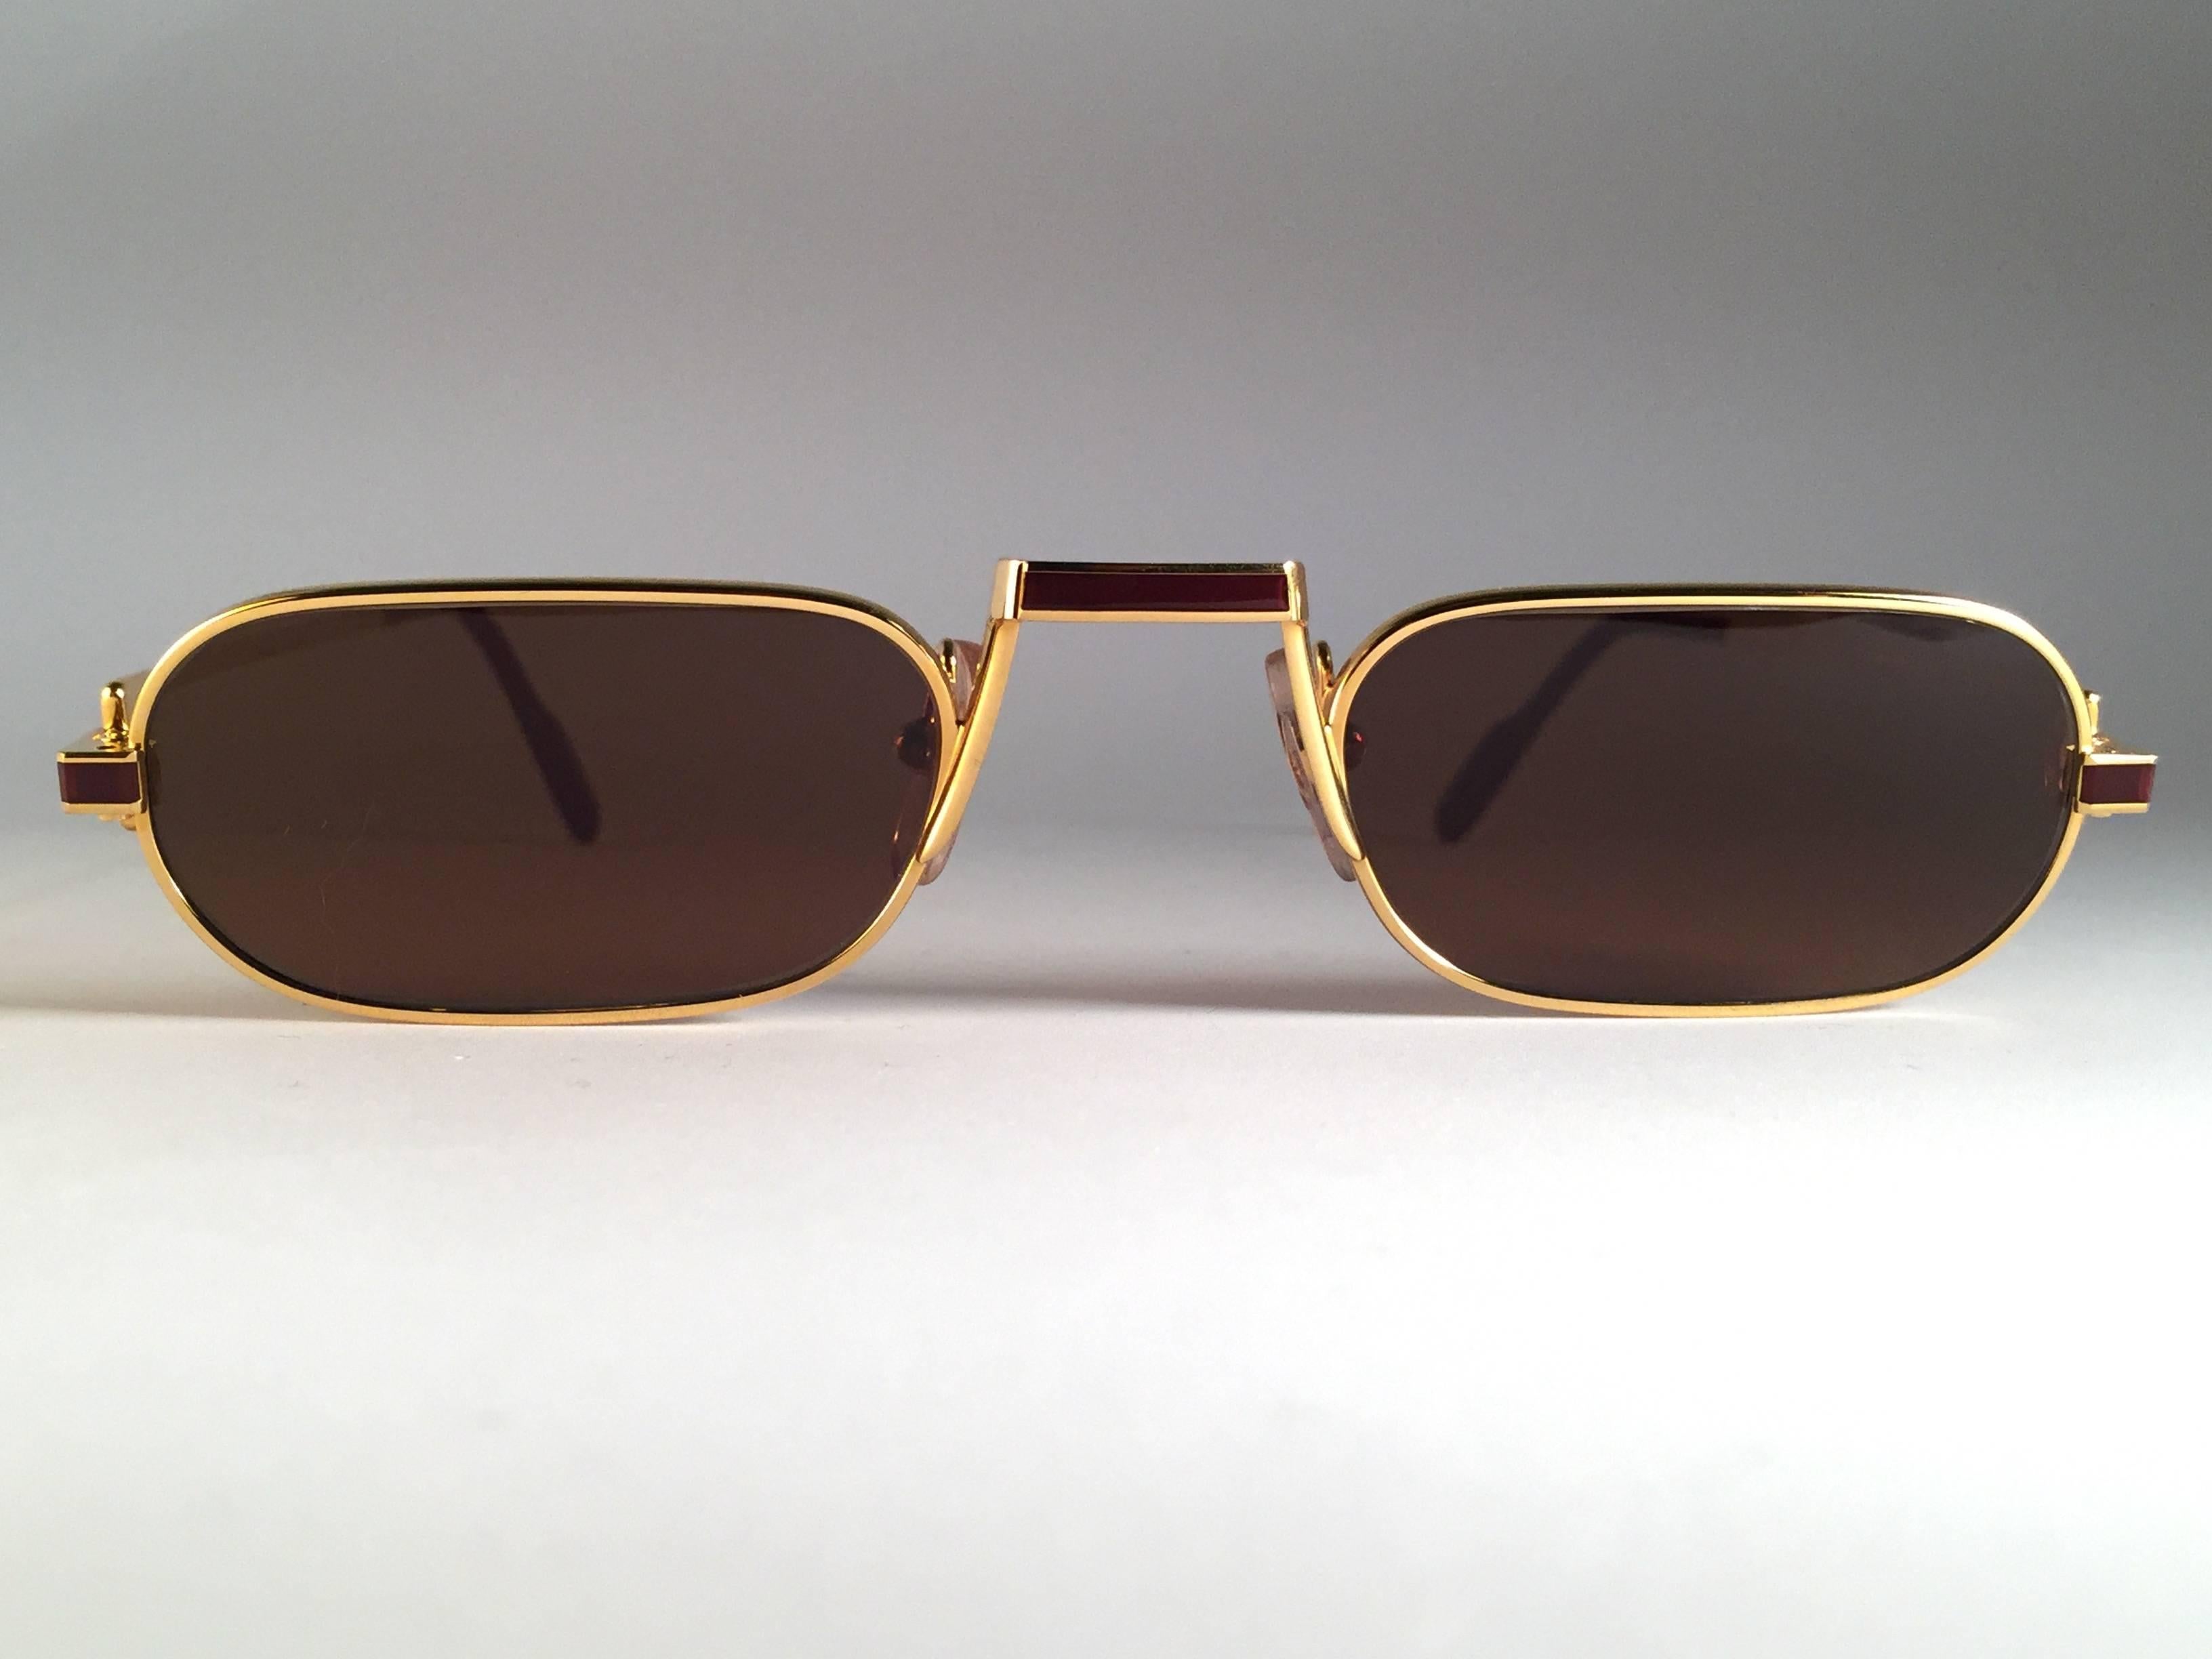 Original 1983 Cartier Demilune Cartier Laque De Chine sunglasses with new honey brown lenses. Very comfortable as reading glasses. All hallmarks. Red enamel with Cartier gold signs on the burgundy ear paddles. Both arms sport the C from Cartier on